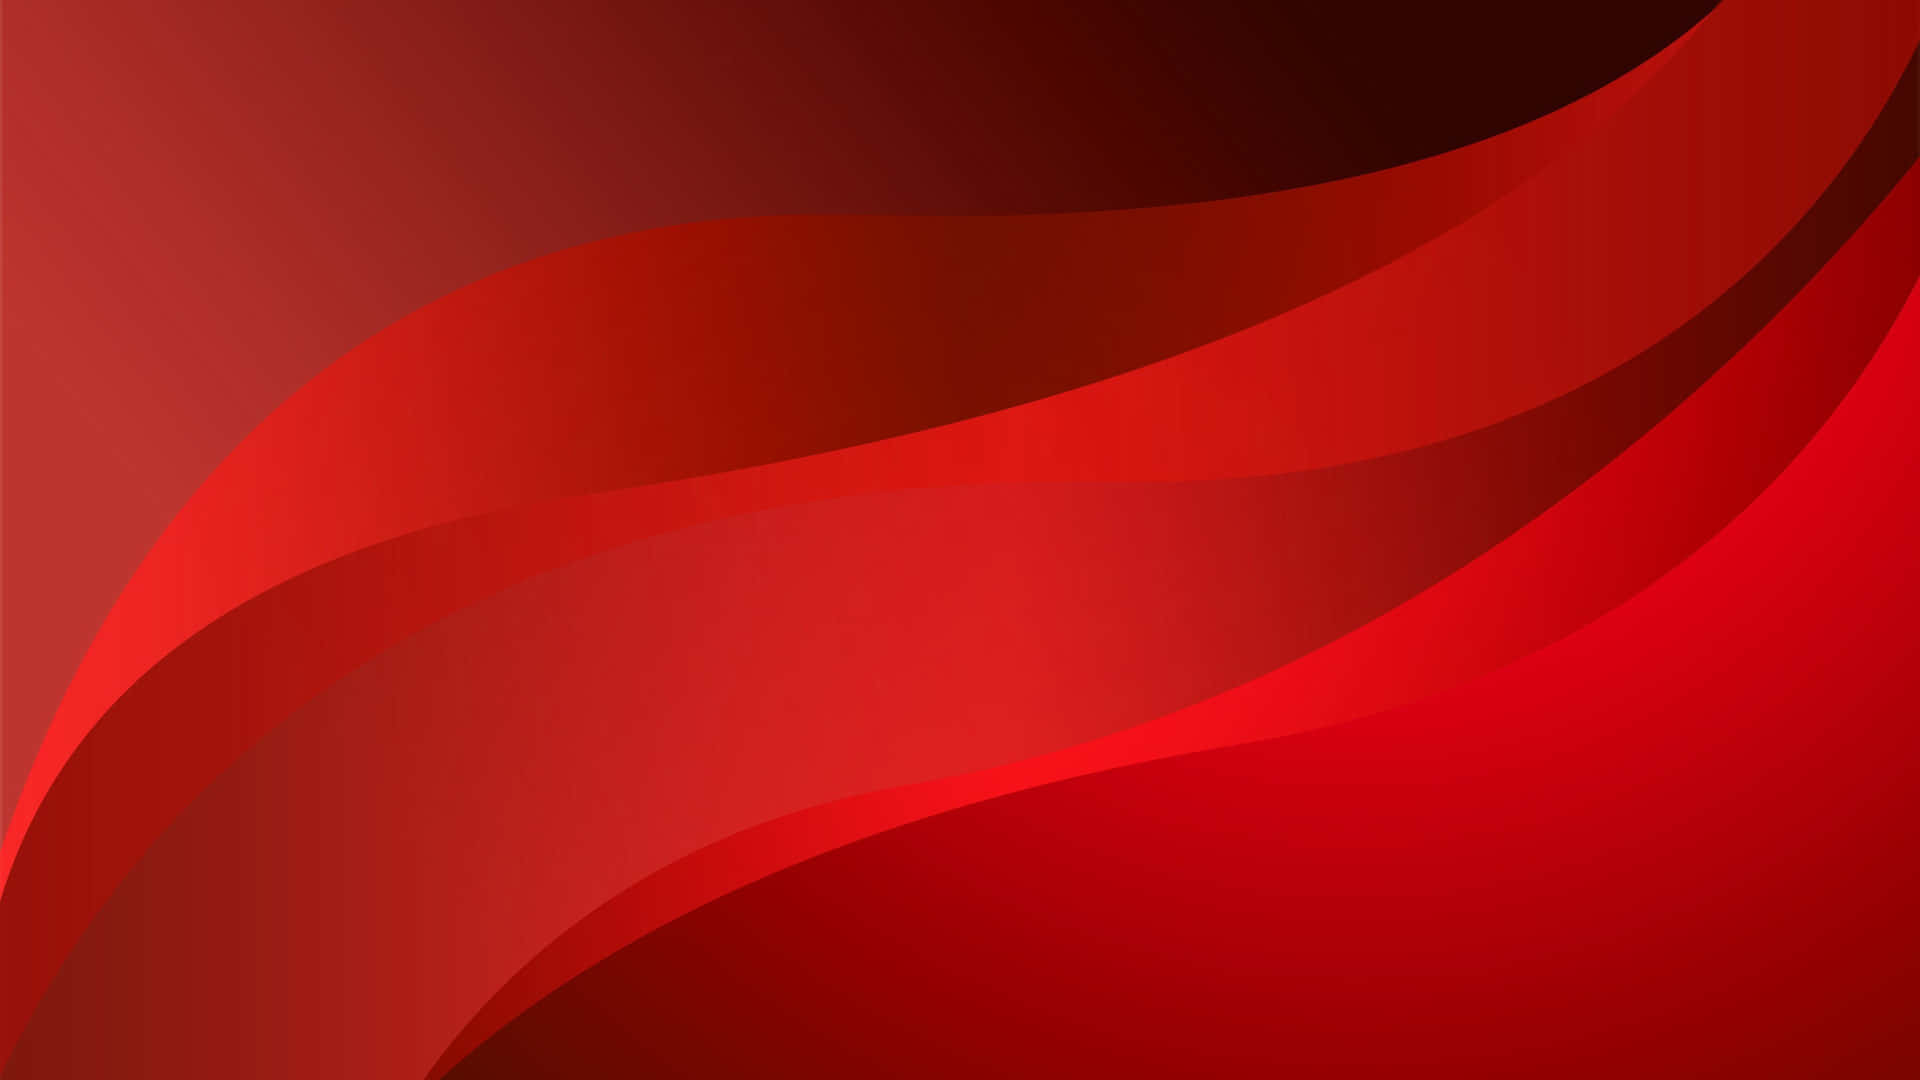 Curving Lines Red Gradient Background